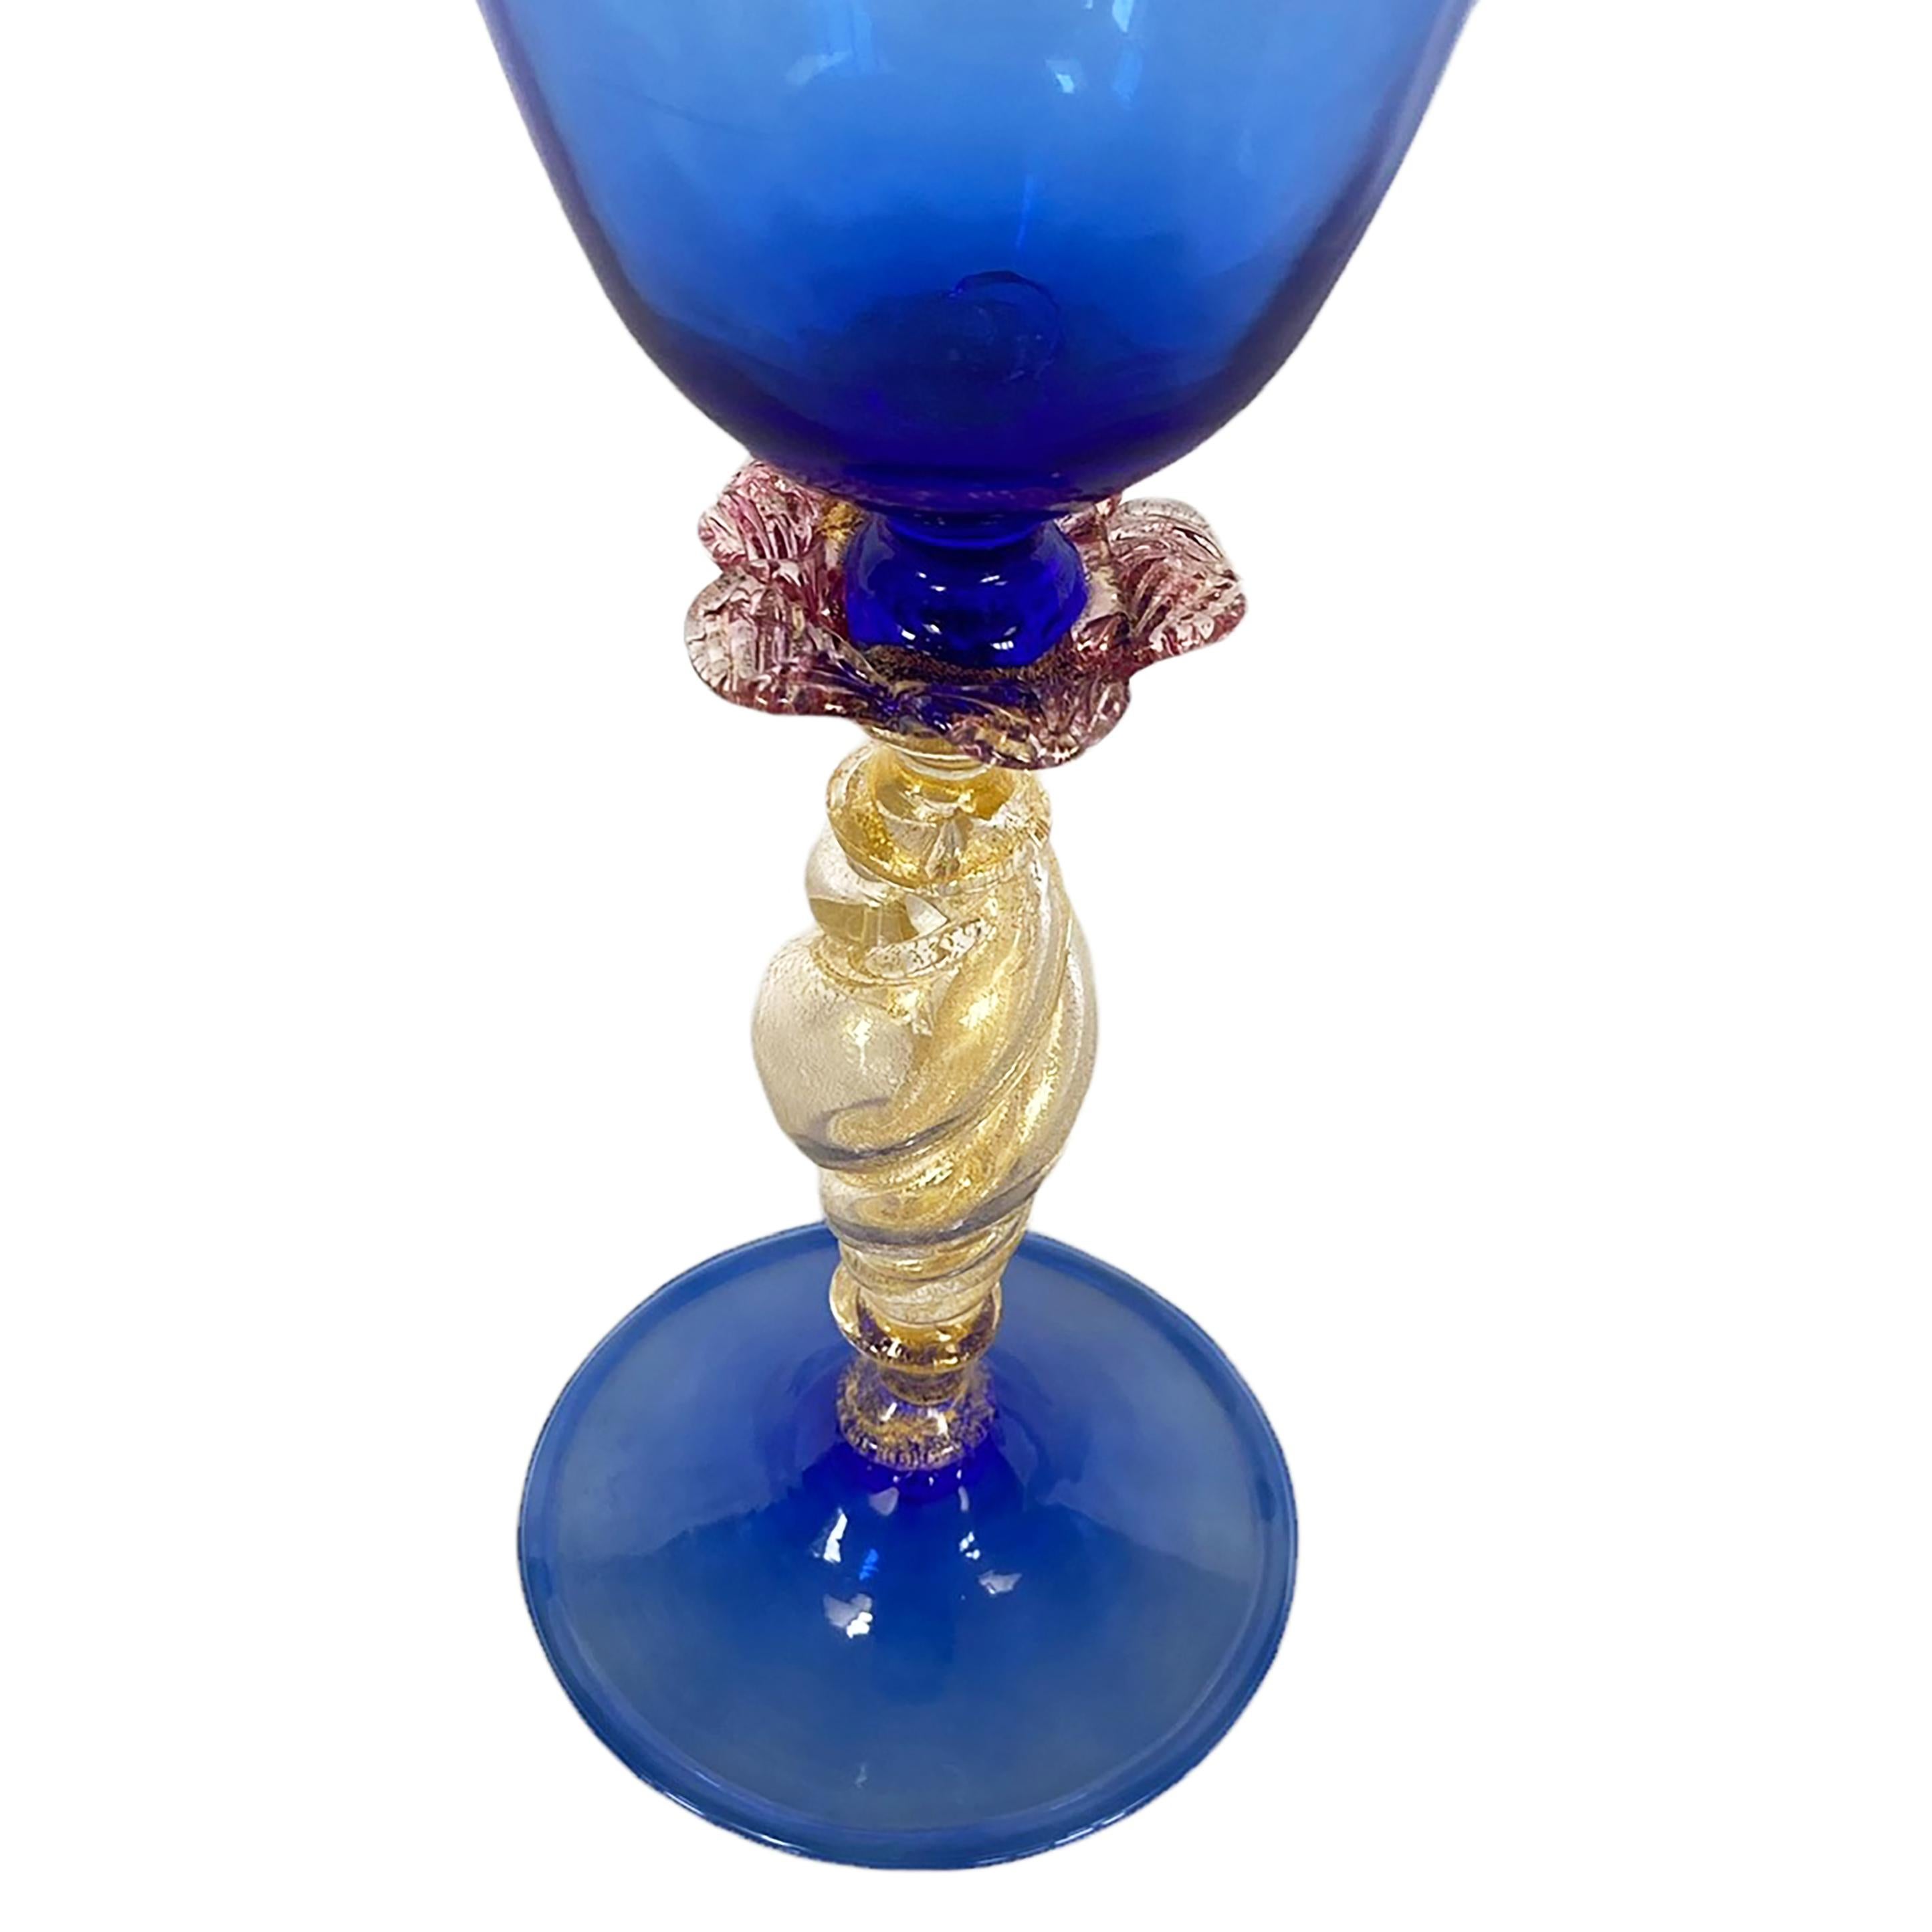 Rich blue with flower and shell stem
From Italy. Handmade and signed by Murano master glassmaker.
We have 15 of these gorgeous, highly-collectible art objects. All different, all one-of-a-kind. 
We will be listing all 15. Most have different